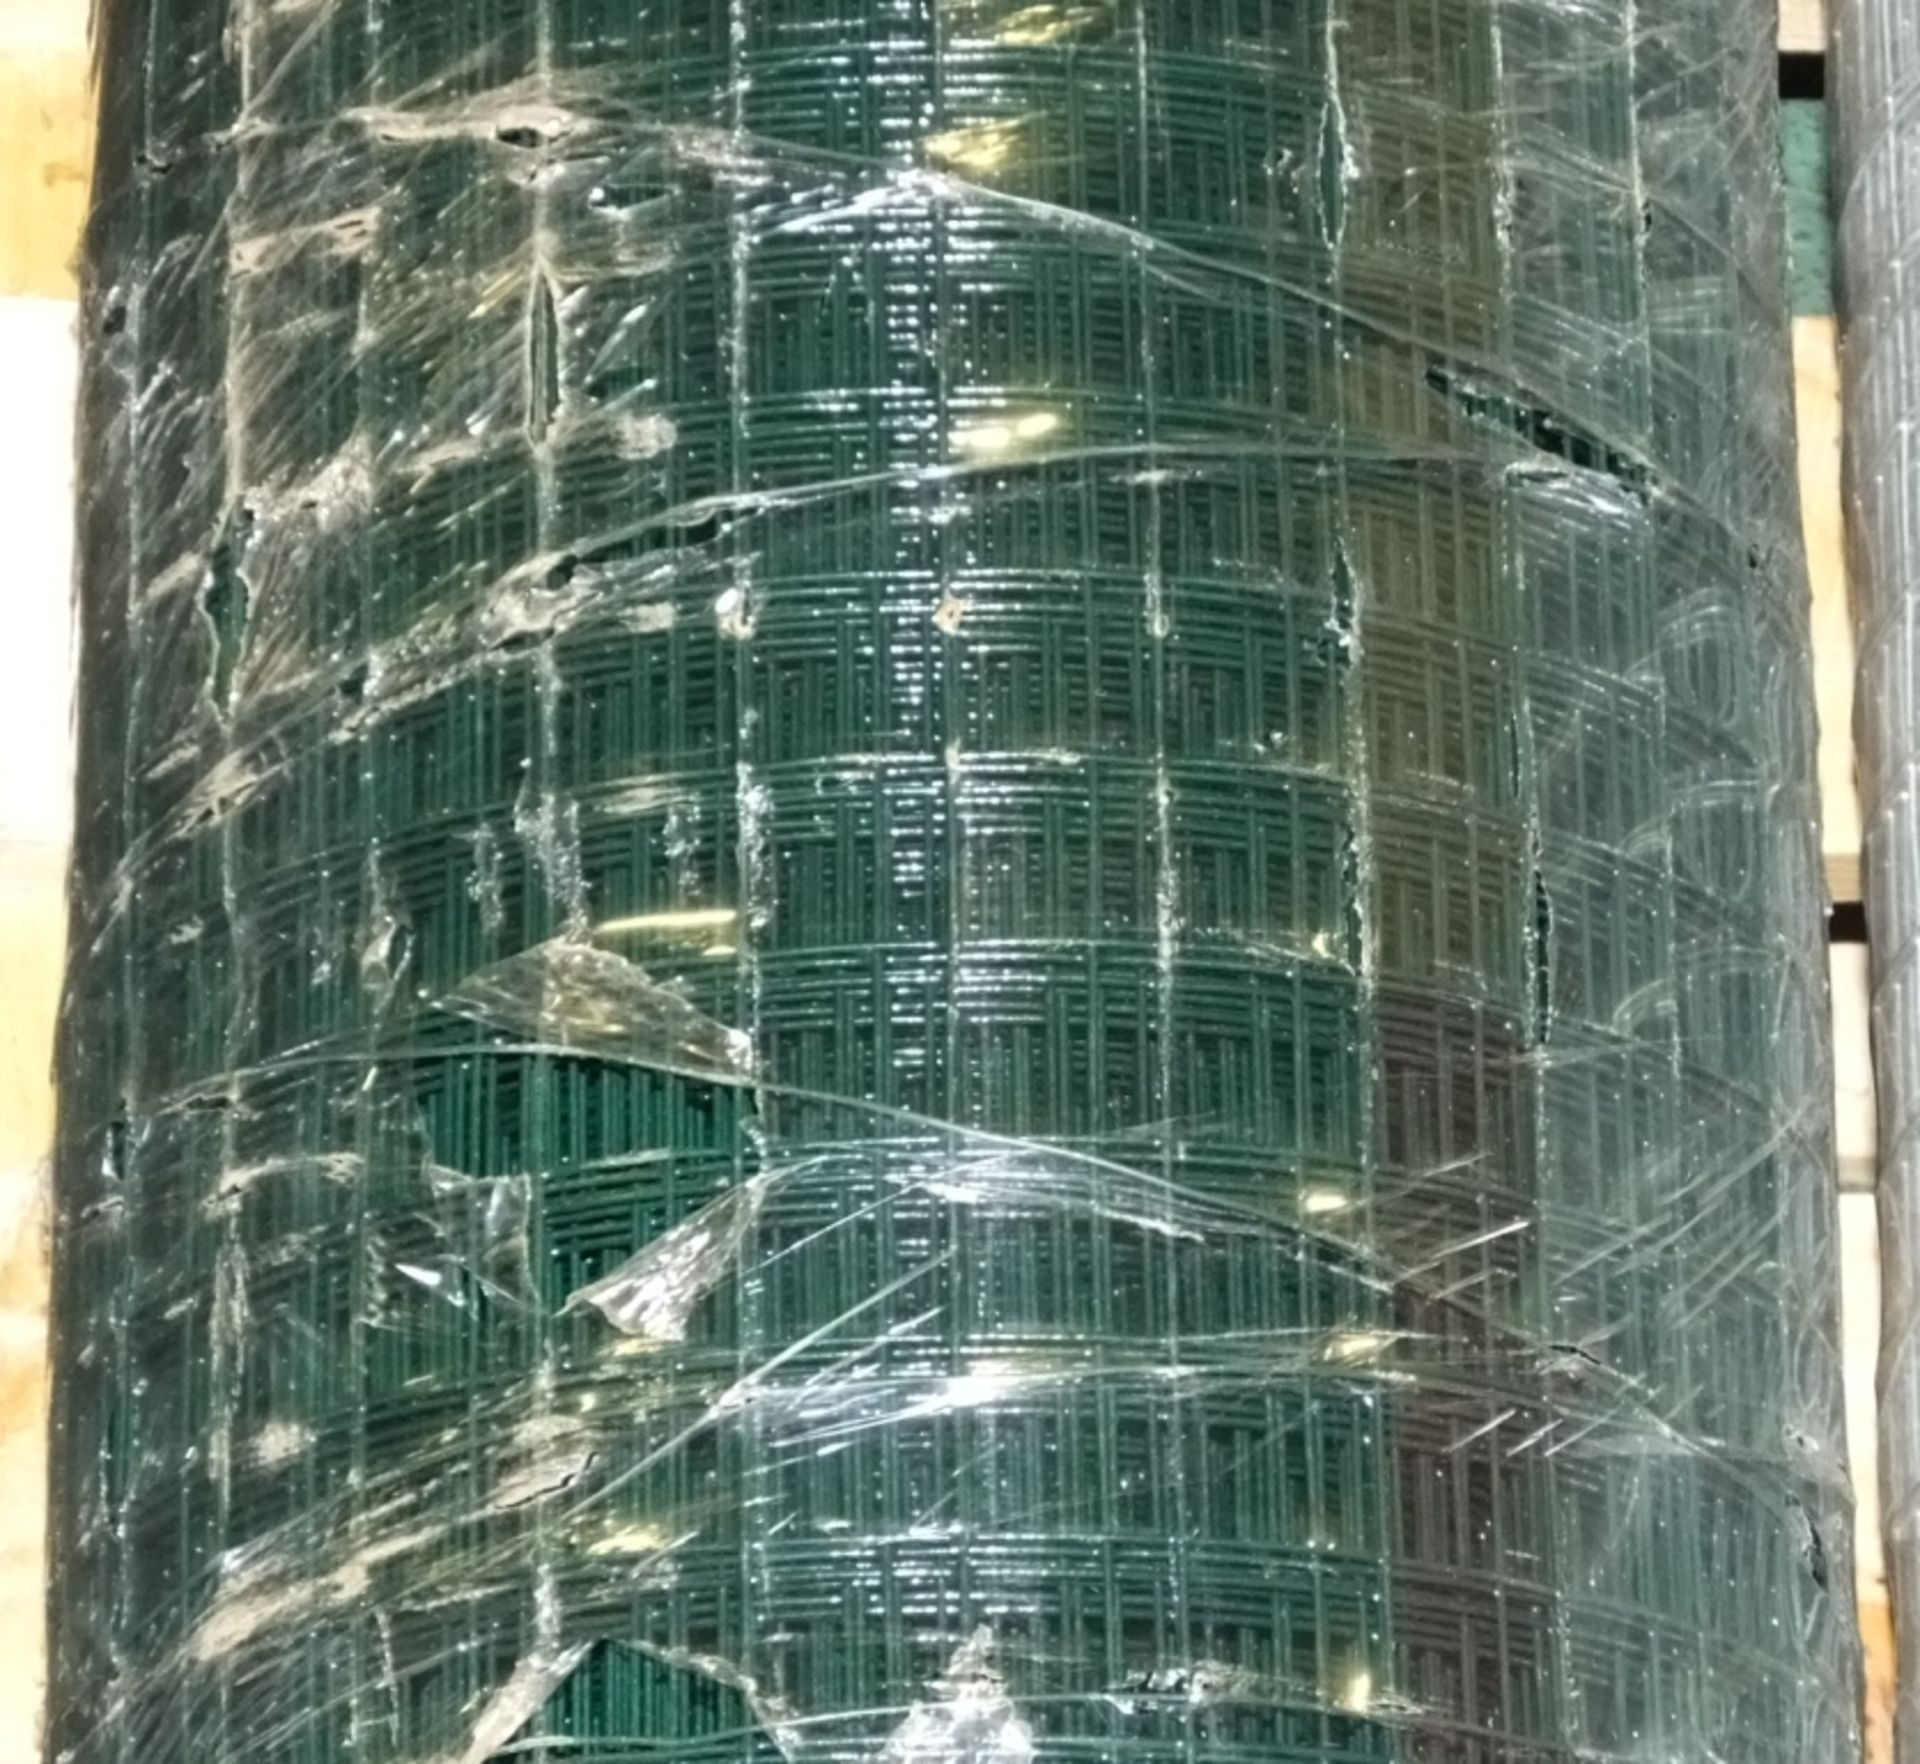 Easy Gardening PVC Coated Welded Mesh (Green) - 1" x 1" - 36" x 30M - Image 3 of 3